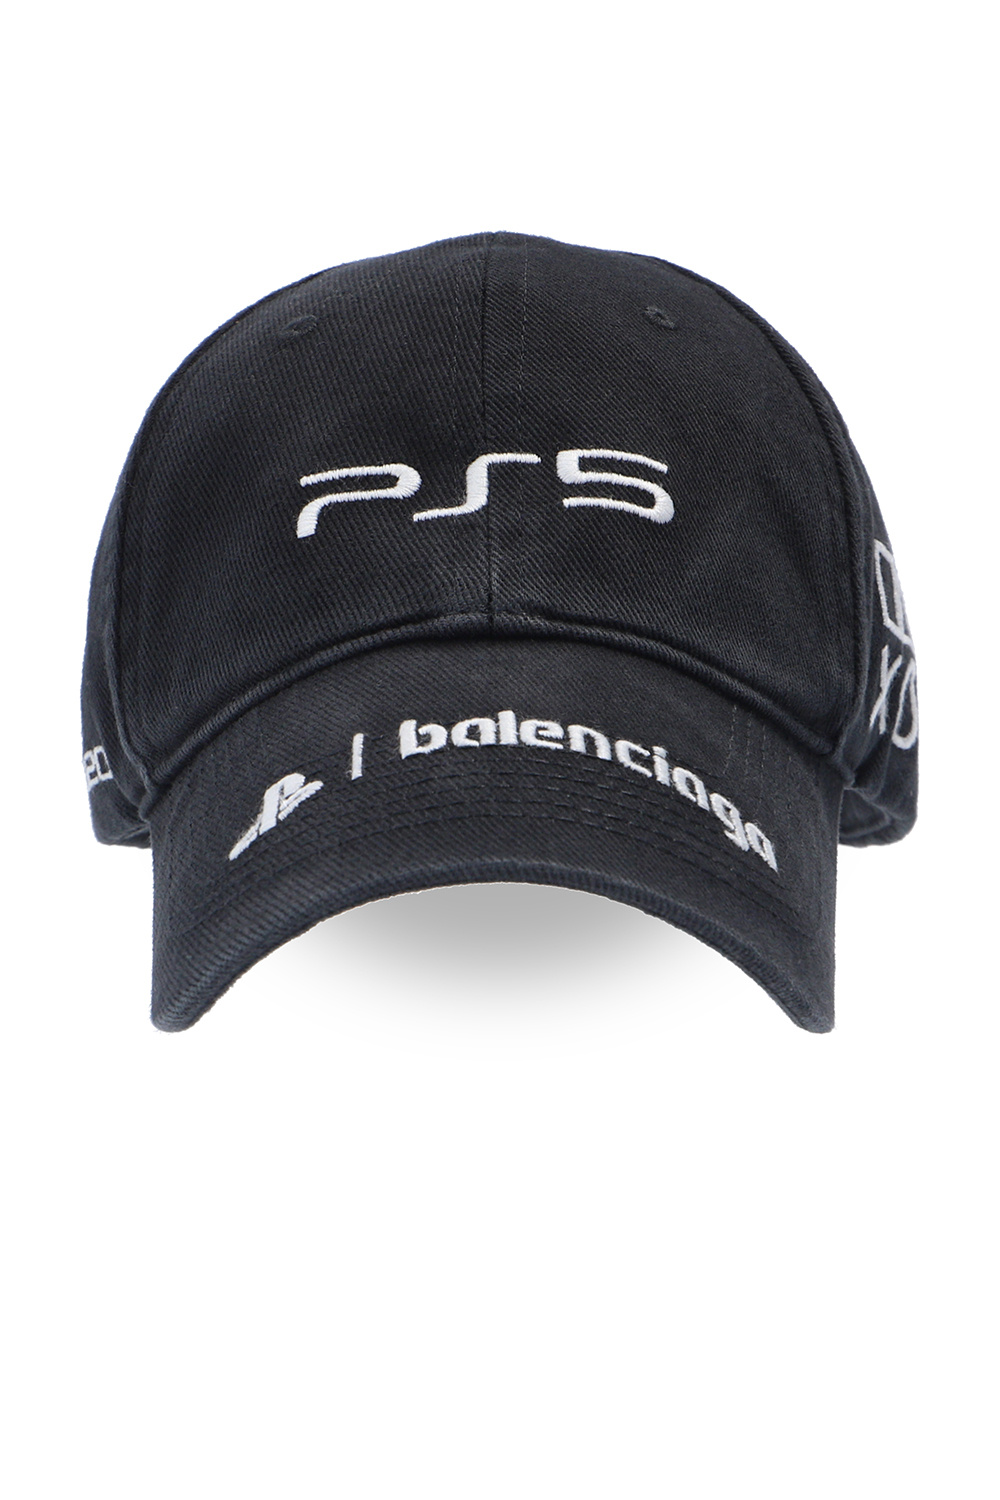 X PlayStation PS5 Baseball Cap Black and White  The Webster